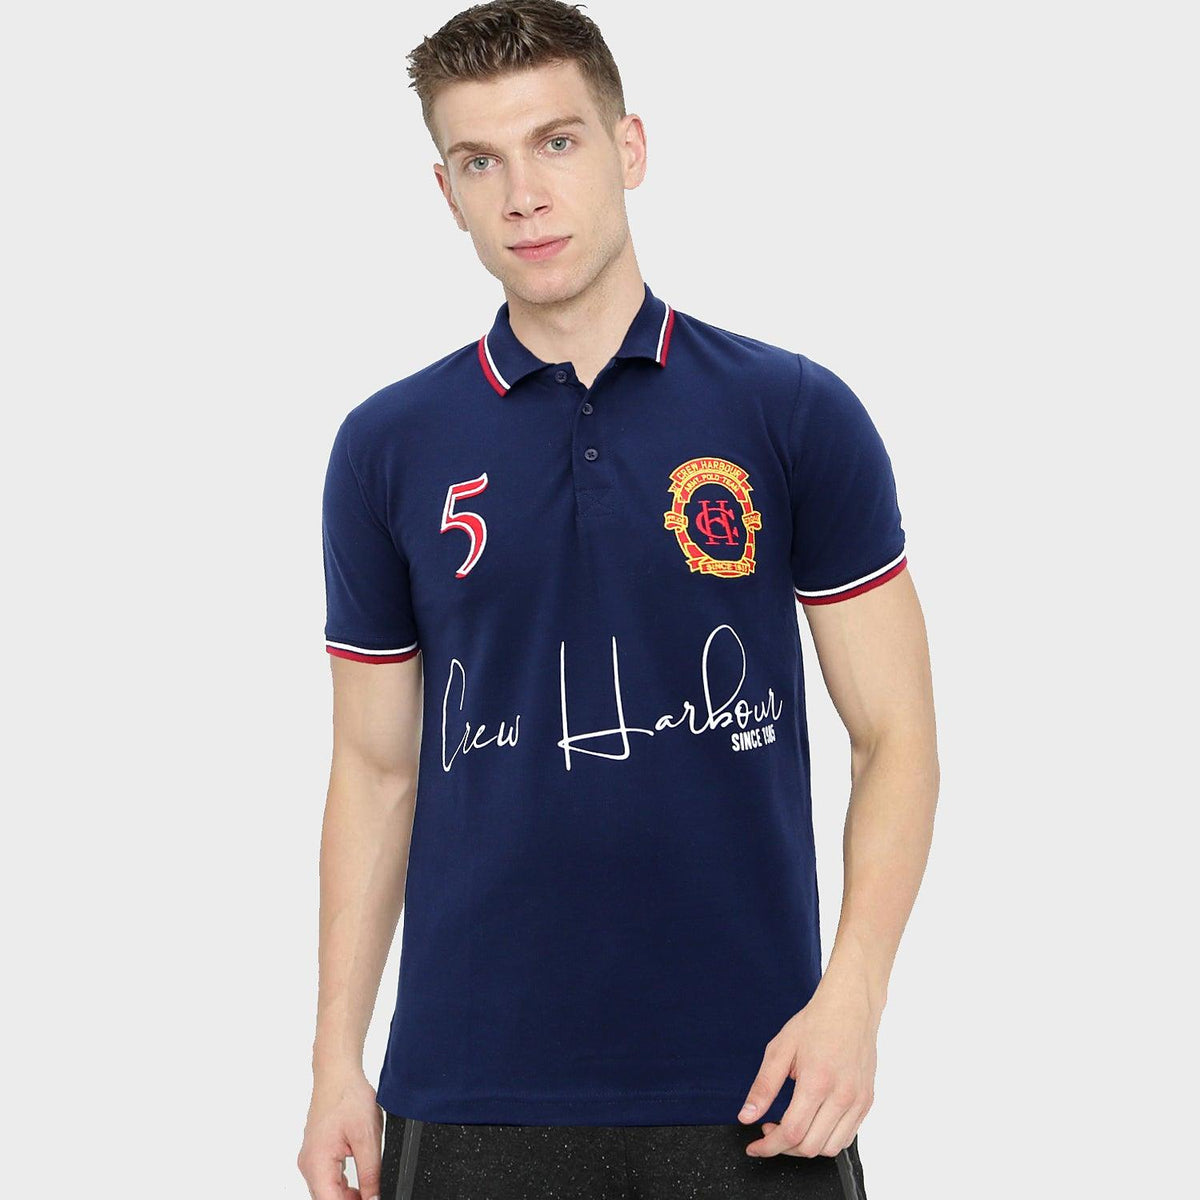 Mens Navy Premium Quality Slim Fit Embellished Embroidered Pique Polo Shirt (CR-11243) - Brands River